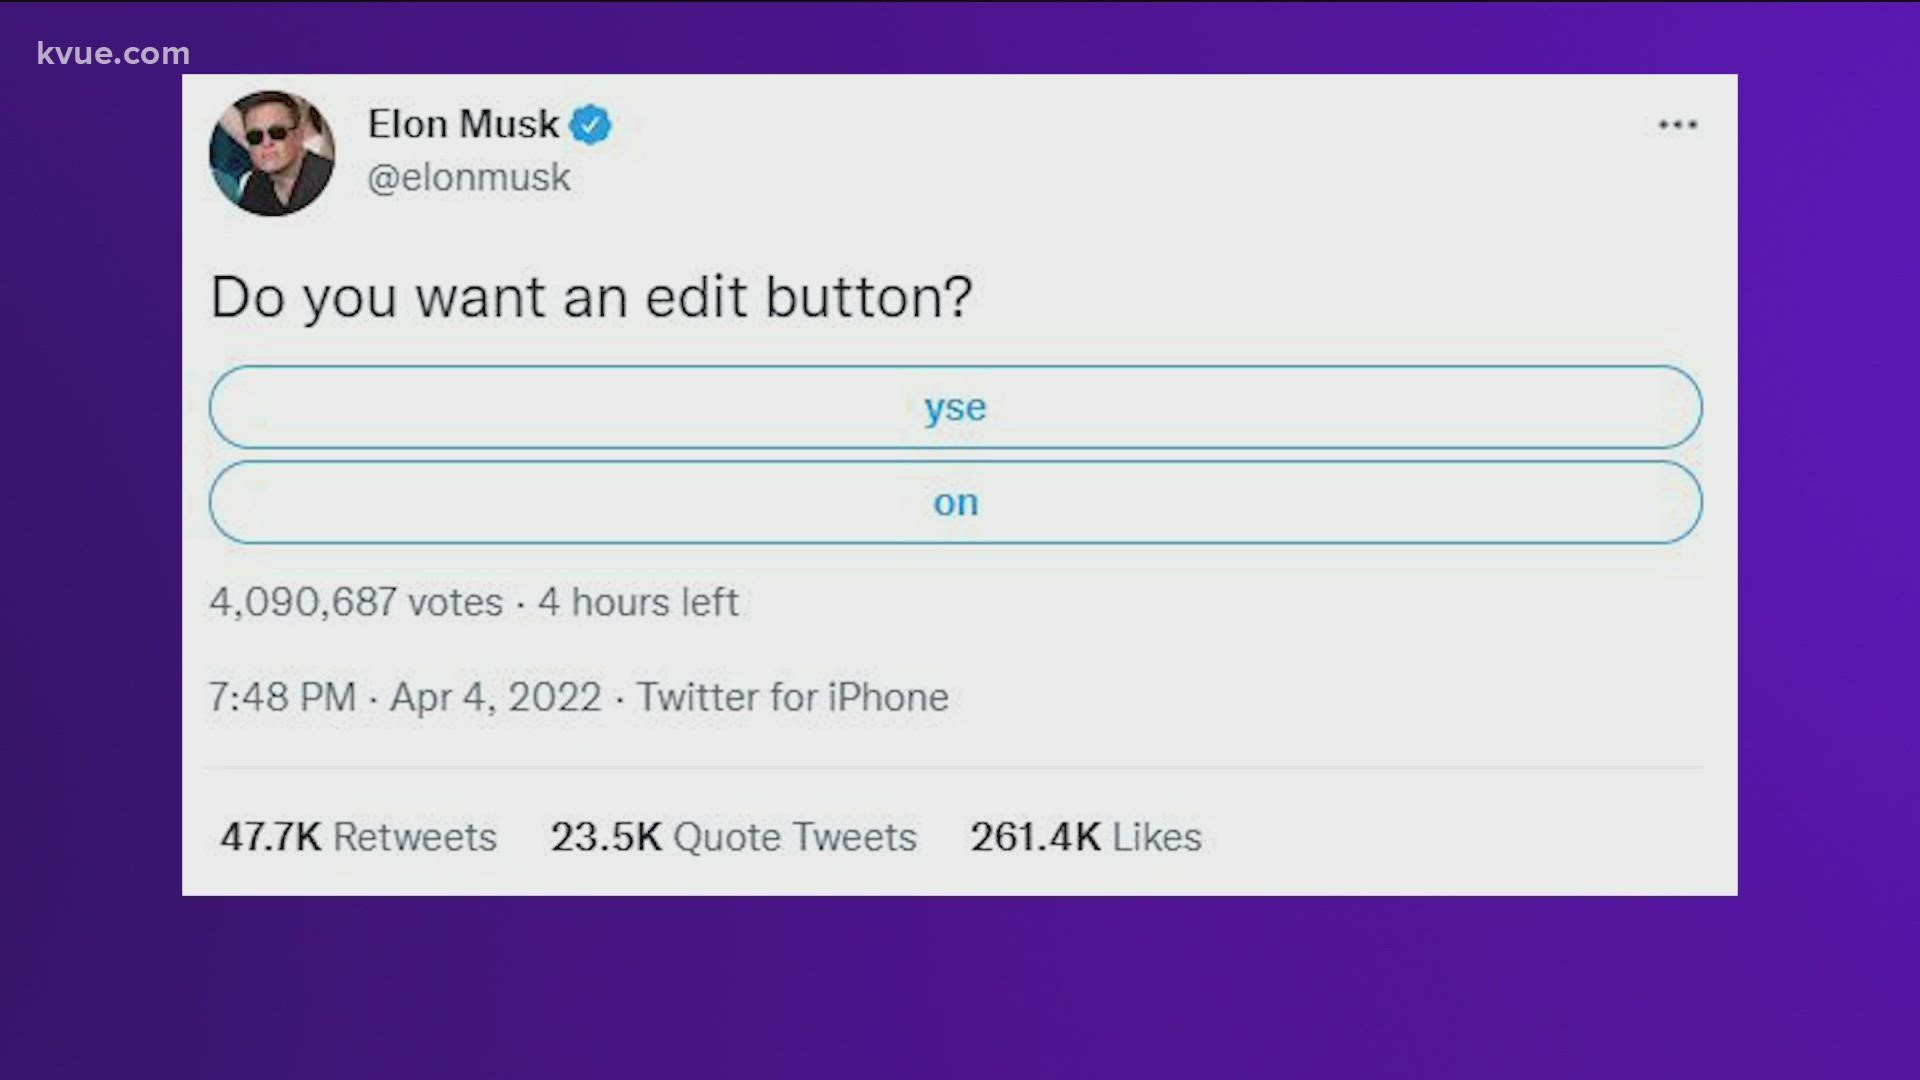 The question now is whether he'll deliver on the elusive edit button many users have been clamoring for since the company's birth in 2006.